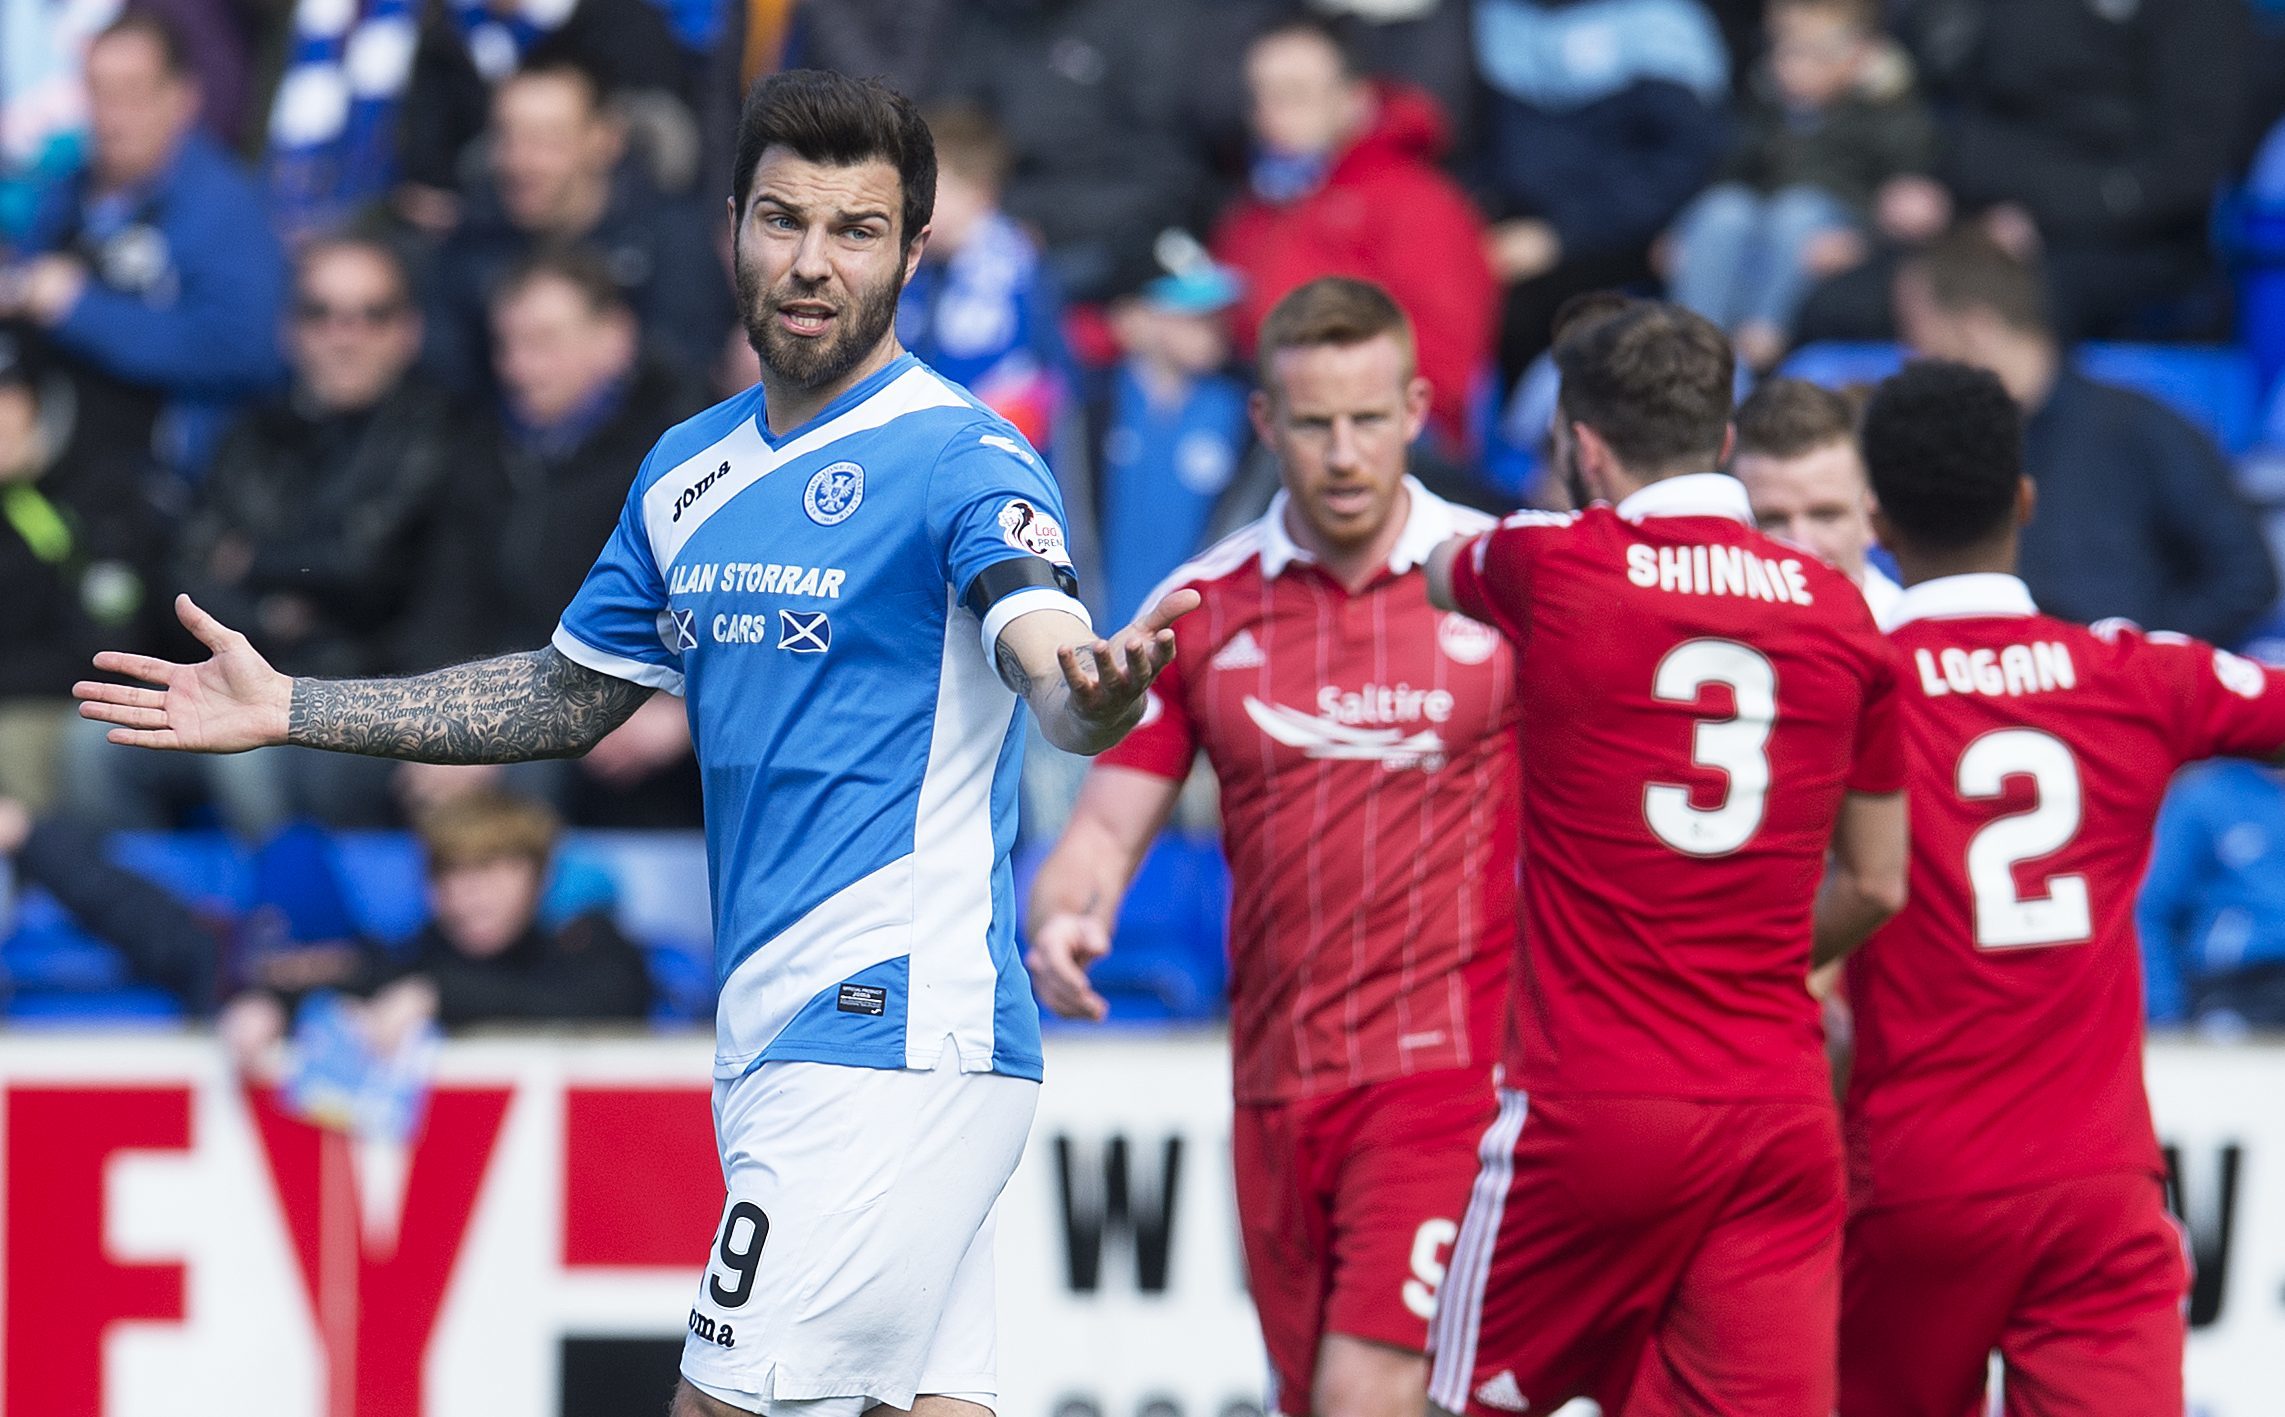 St Johnstone's Richard Foster is dejected after Aberdeen's second goal.